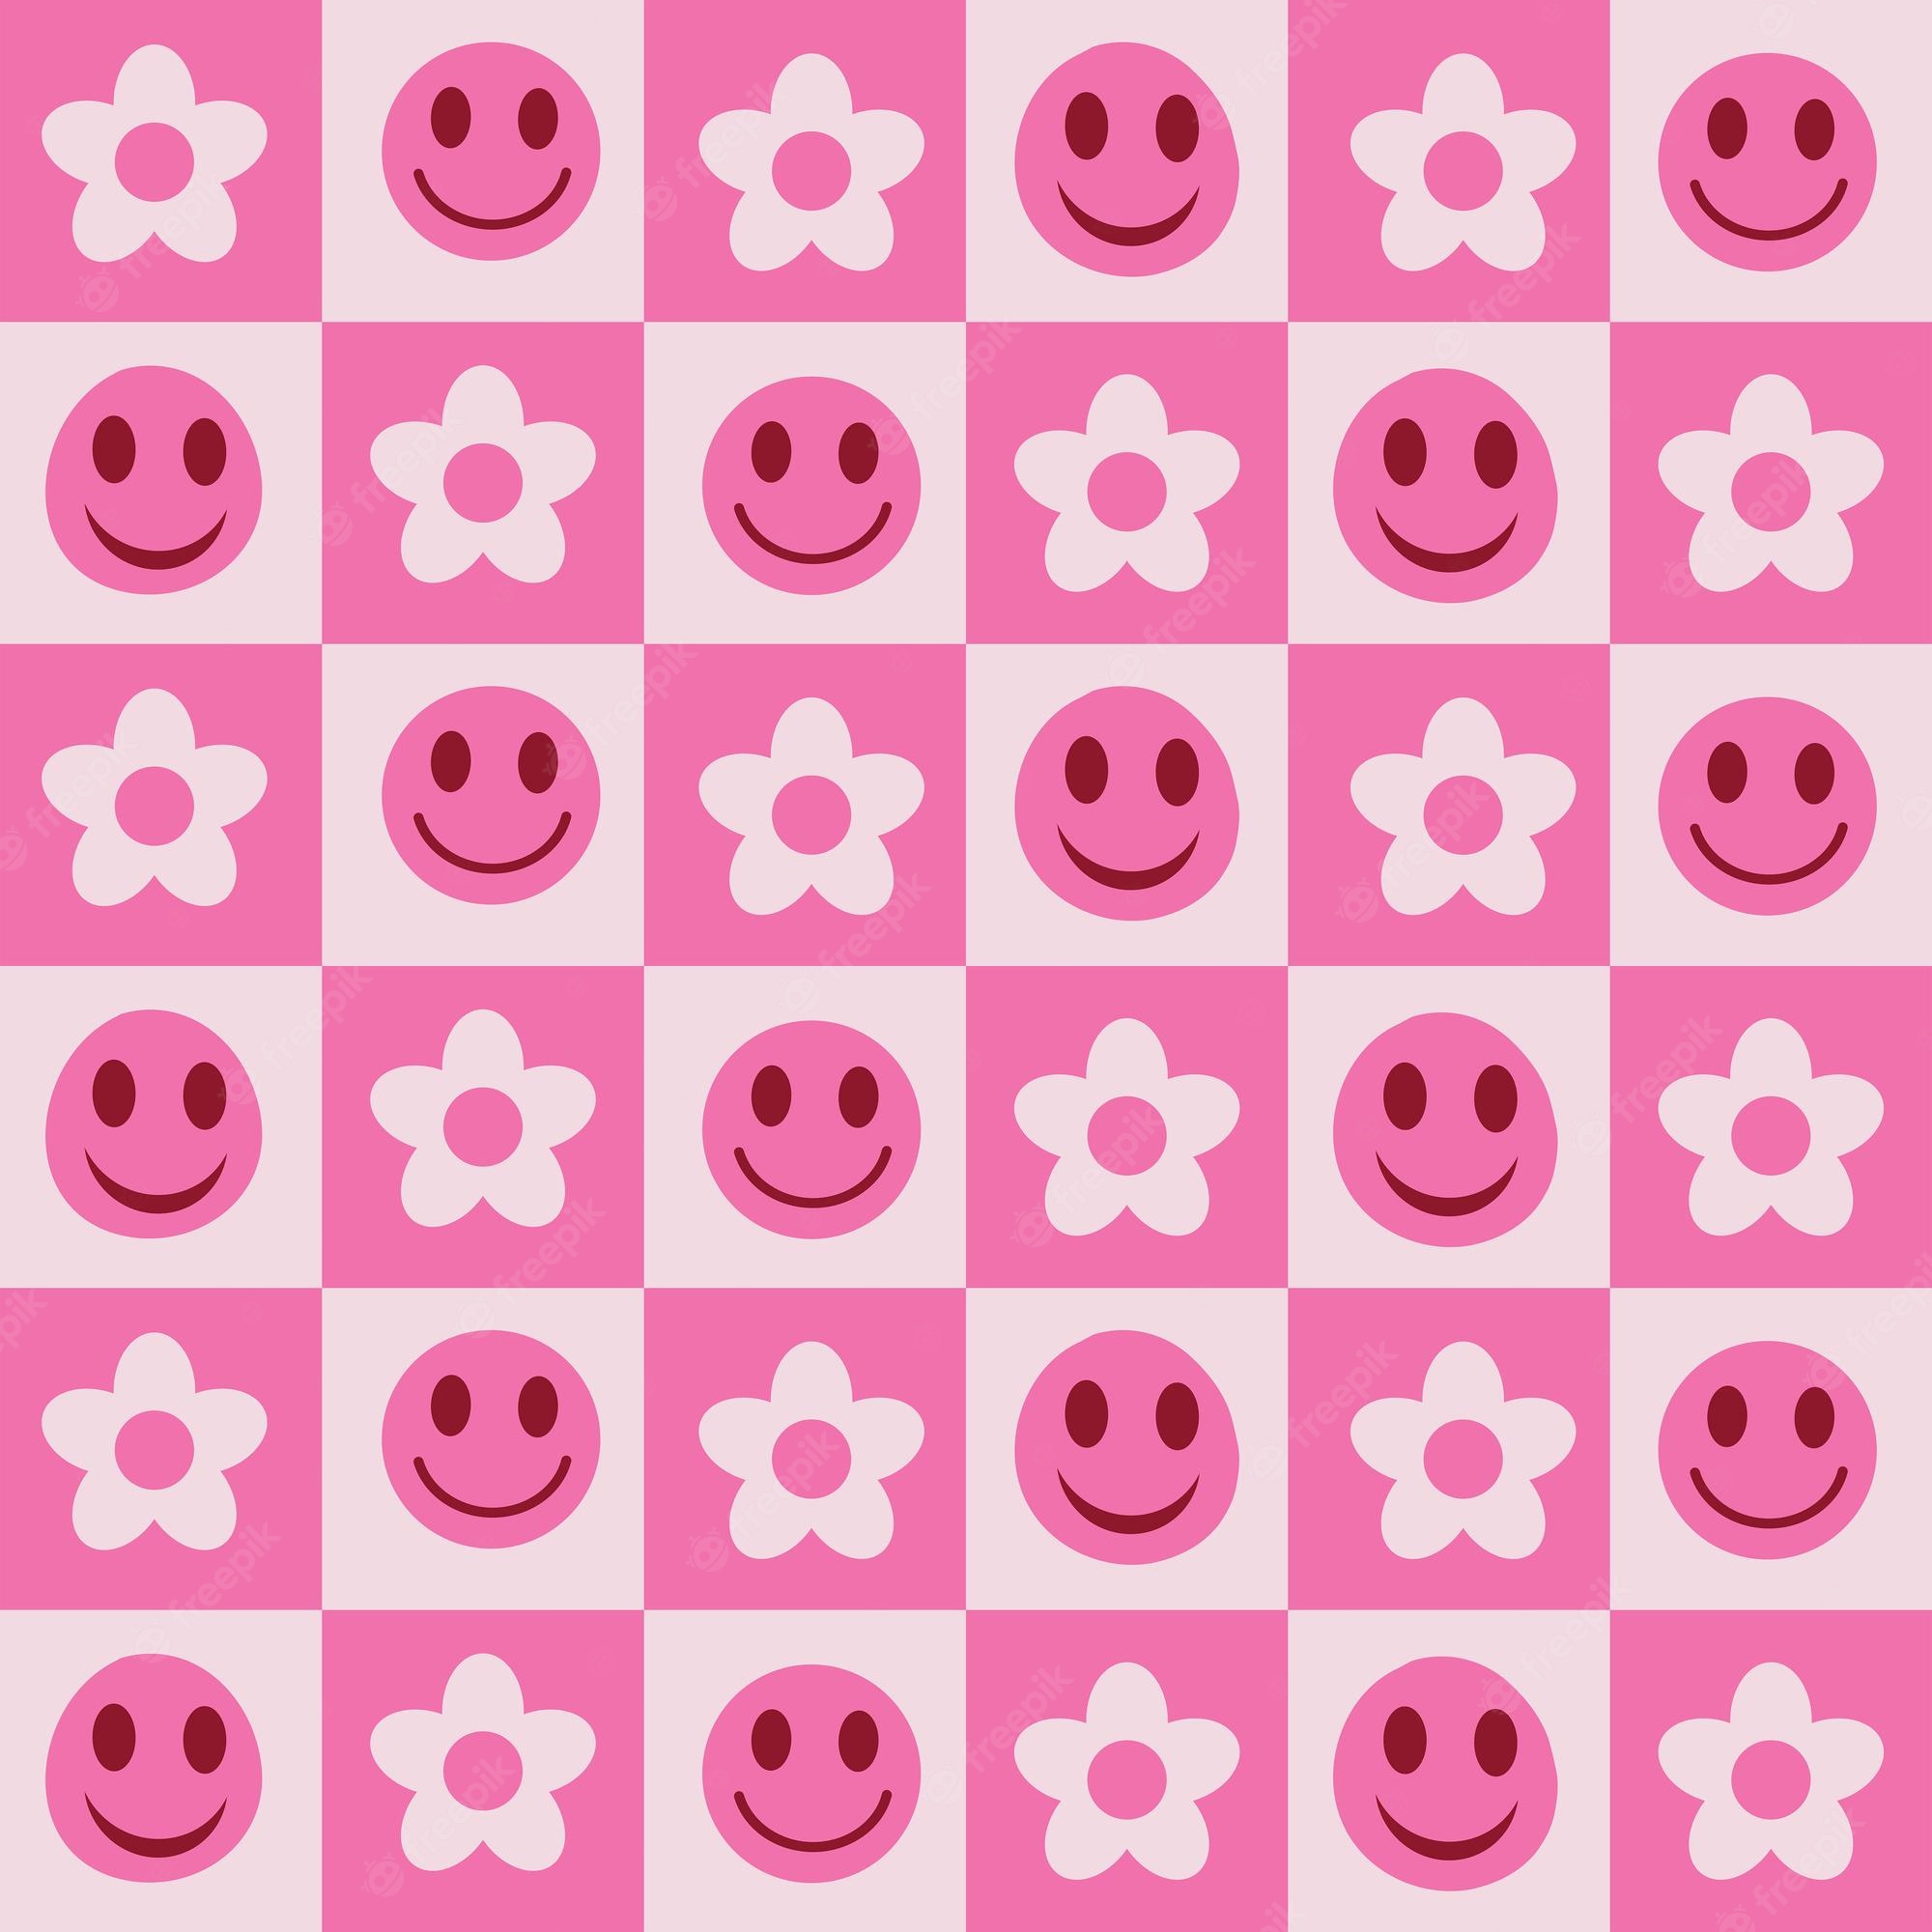 Smiley face pattern Image. Free Vectors, & PSD